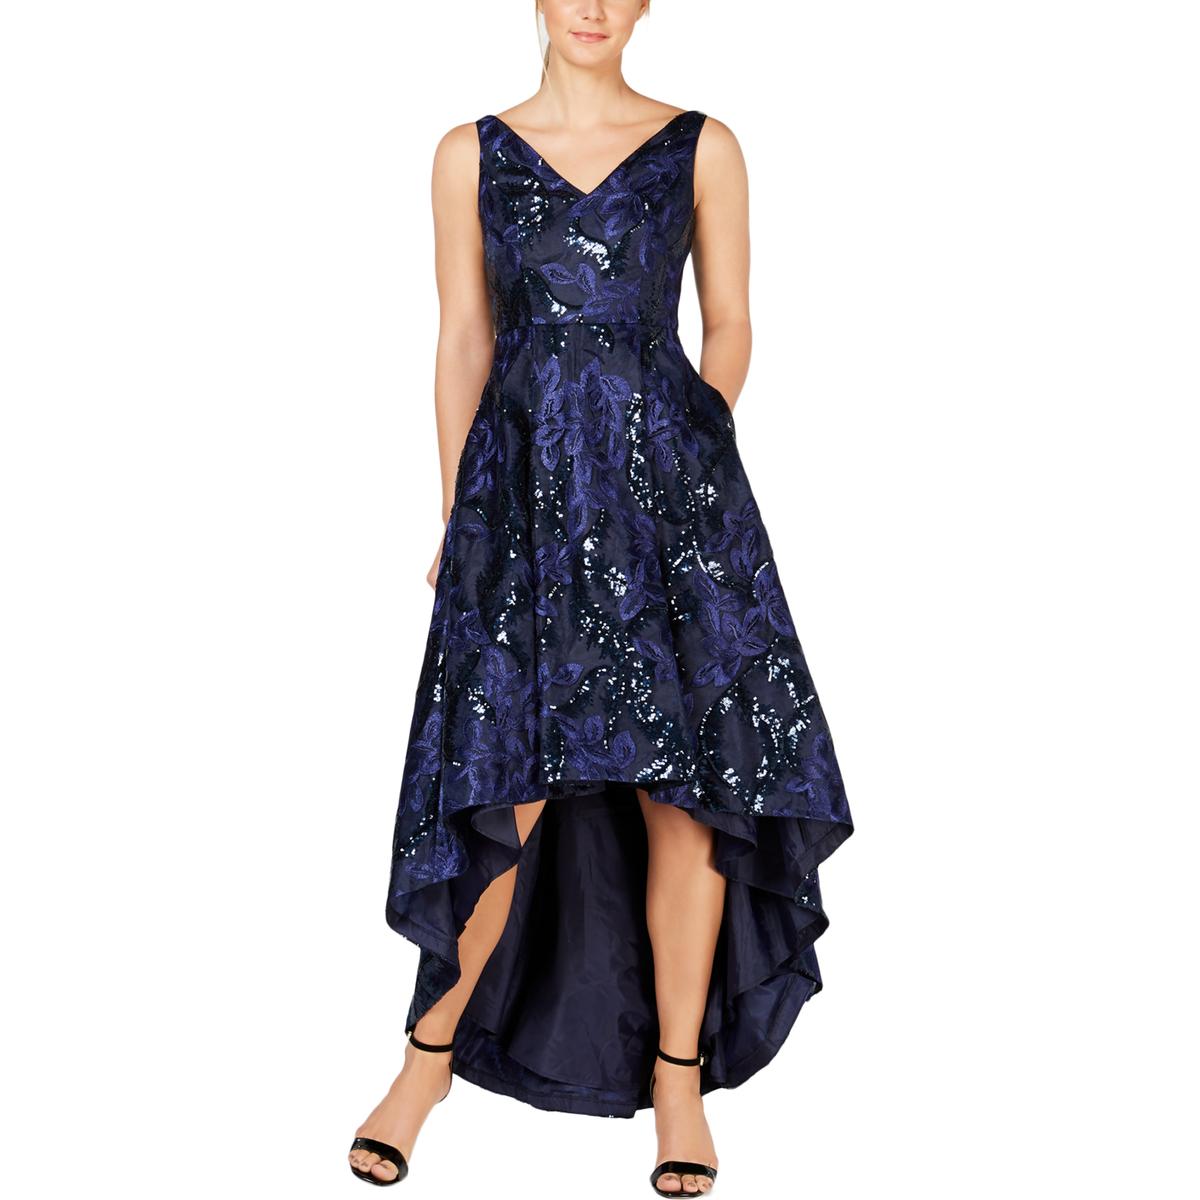 Calvin Klein Womens Blue Lace Sequined Formal Evening Dress Gown 6 BHFO ...